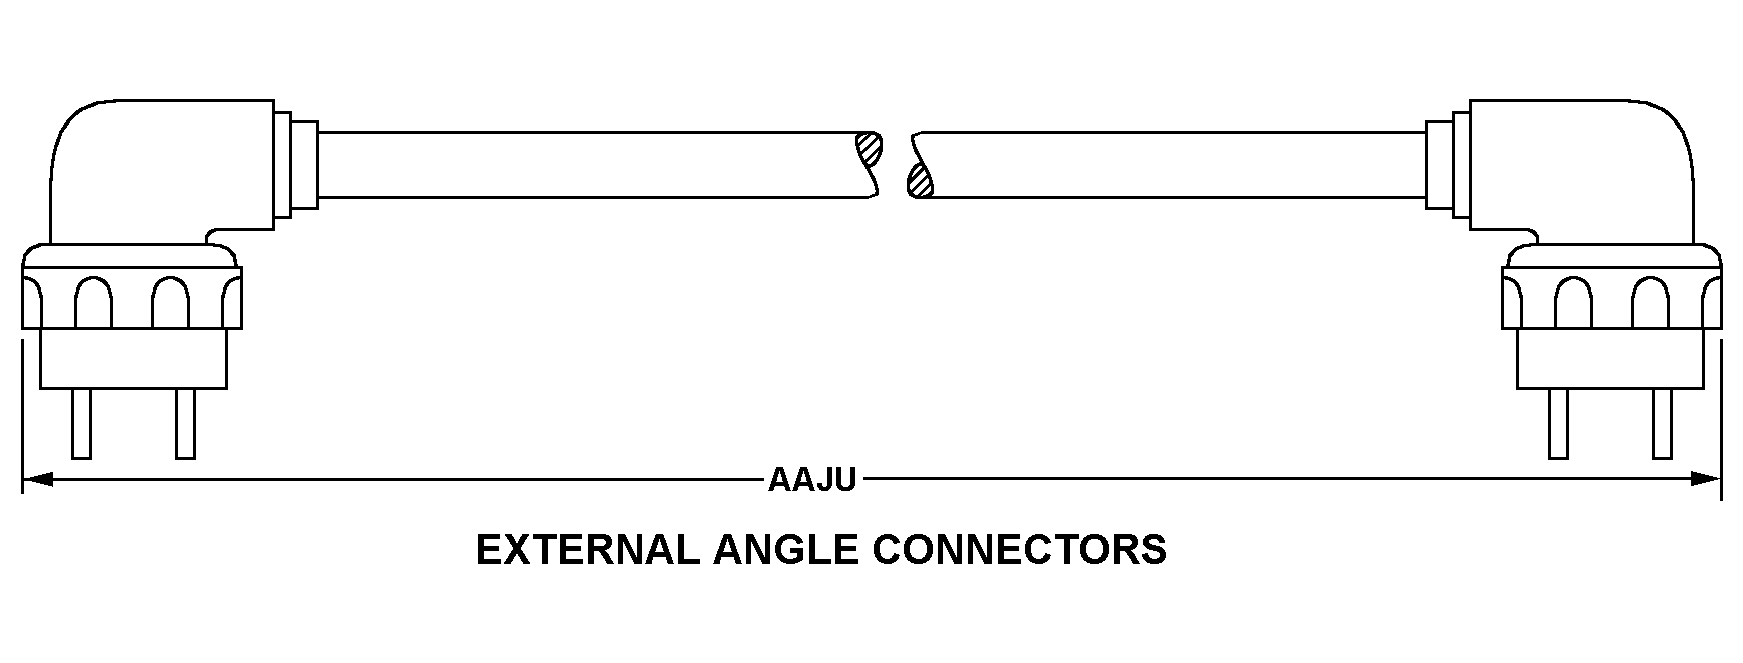 EXTERNAL ANGLE CONNECTORS style nsn 6150-01-371-0279